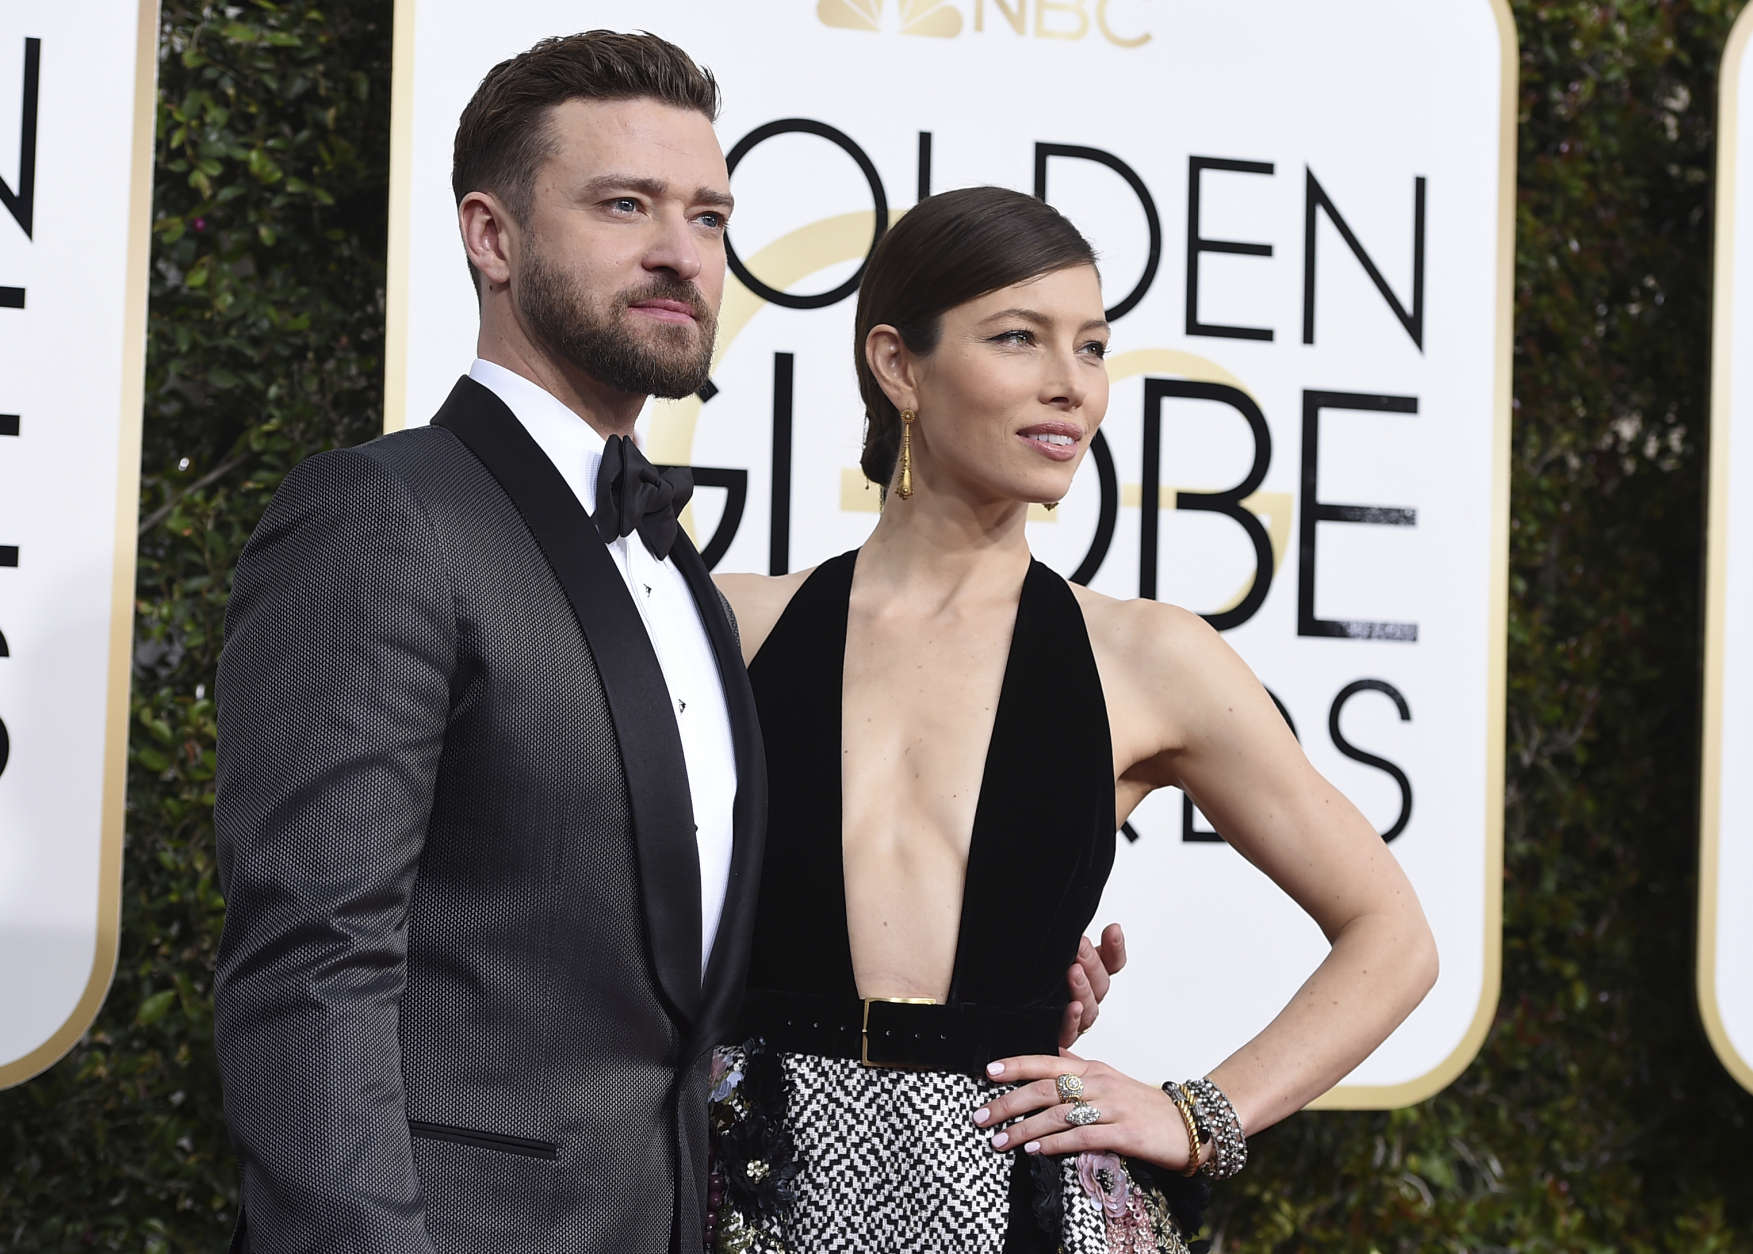 Justin Timberlake, left, and Jessica Biel arrive at the 74th annual Golden Globe Awards at the Beverly Hilton Hotel on Sunday, Jan. 8, 2017, in Beverly Hills, Calif. (Photo by Jordan Strauss/Invision/AP)